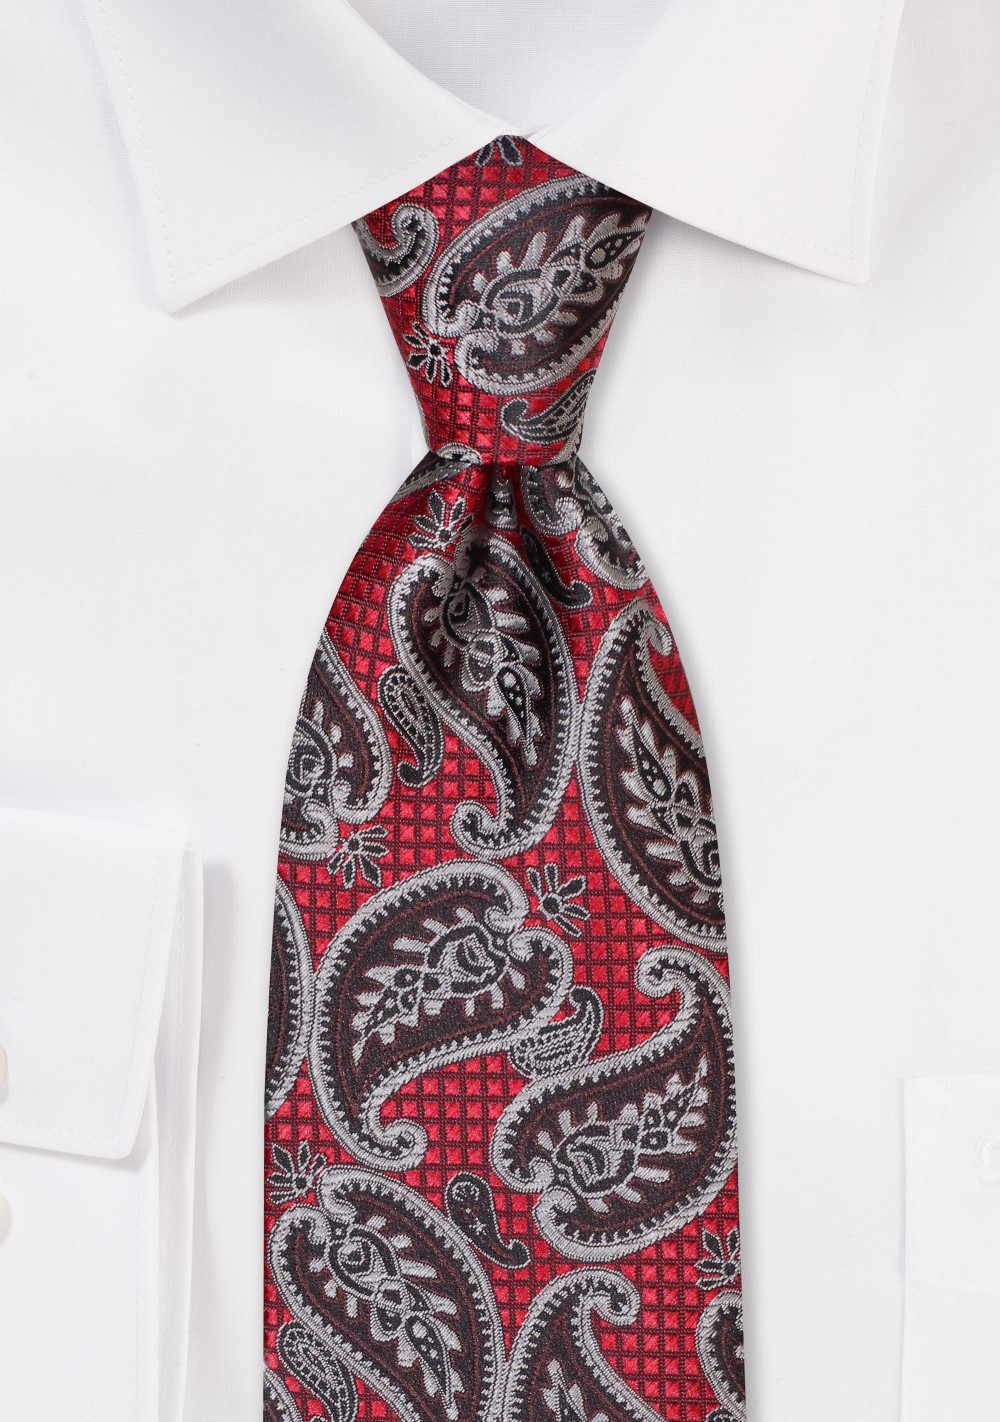 Cherry Red and Gold Paisley Tie | Crimson Red Mens Tie with large ...